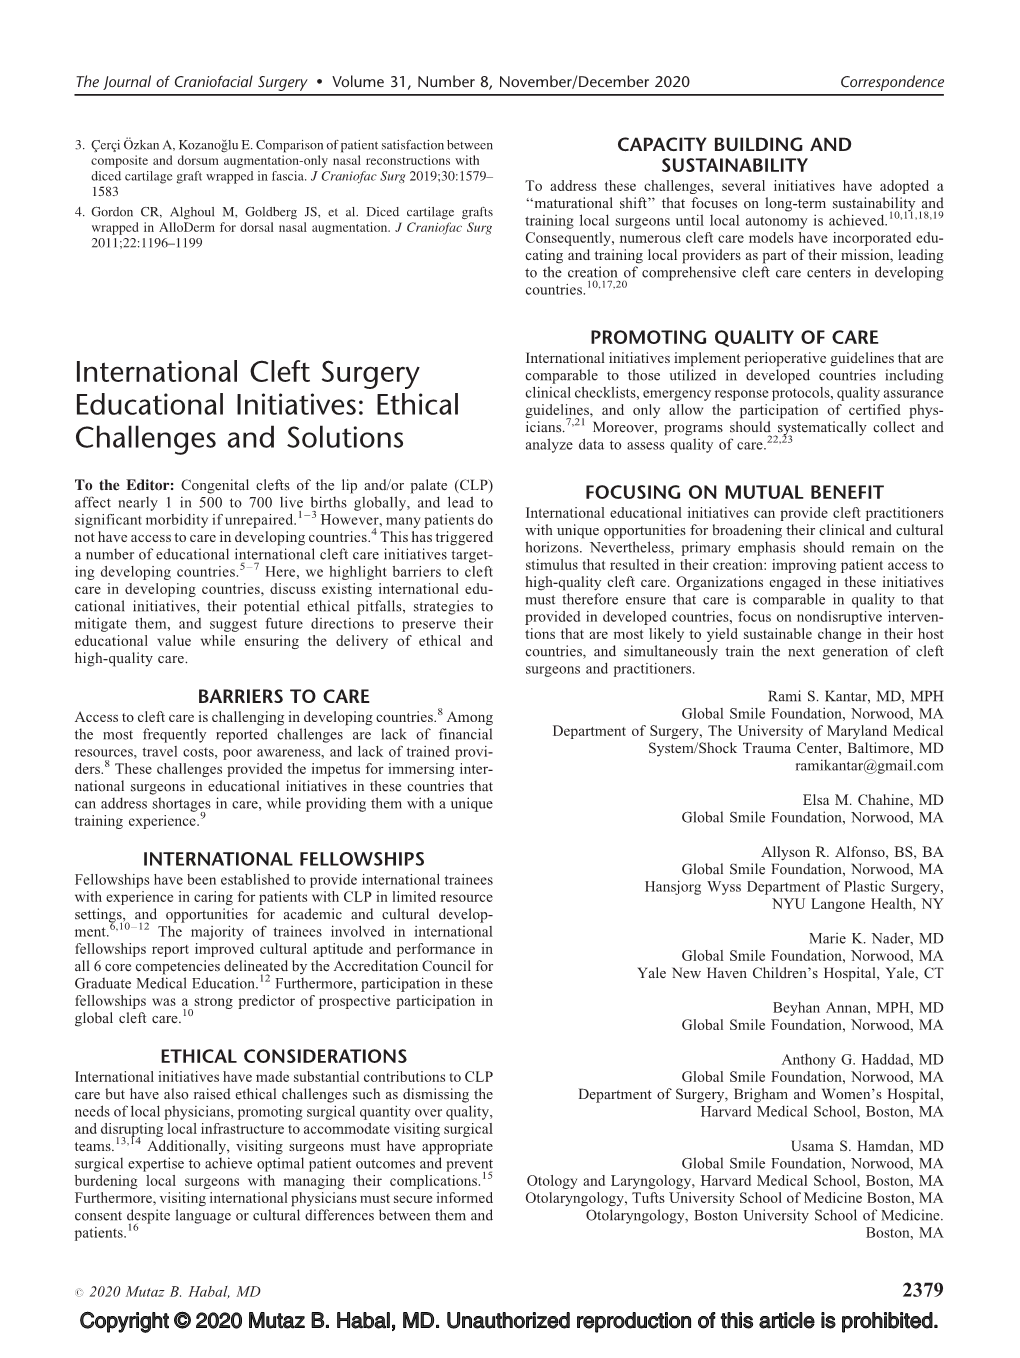 International Cleft Surgery Educational Initiatives: Ethical Challenges and Solutions